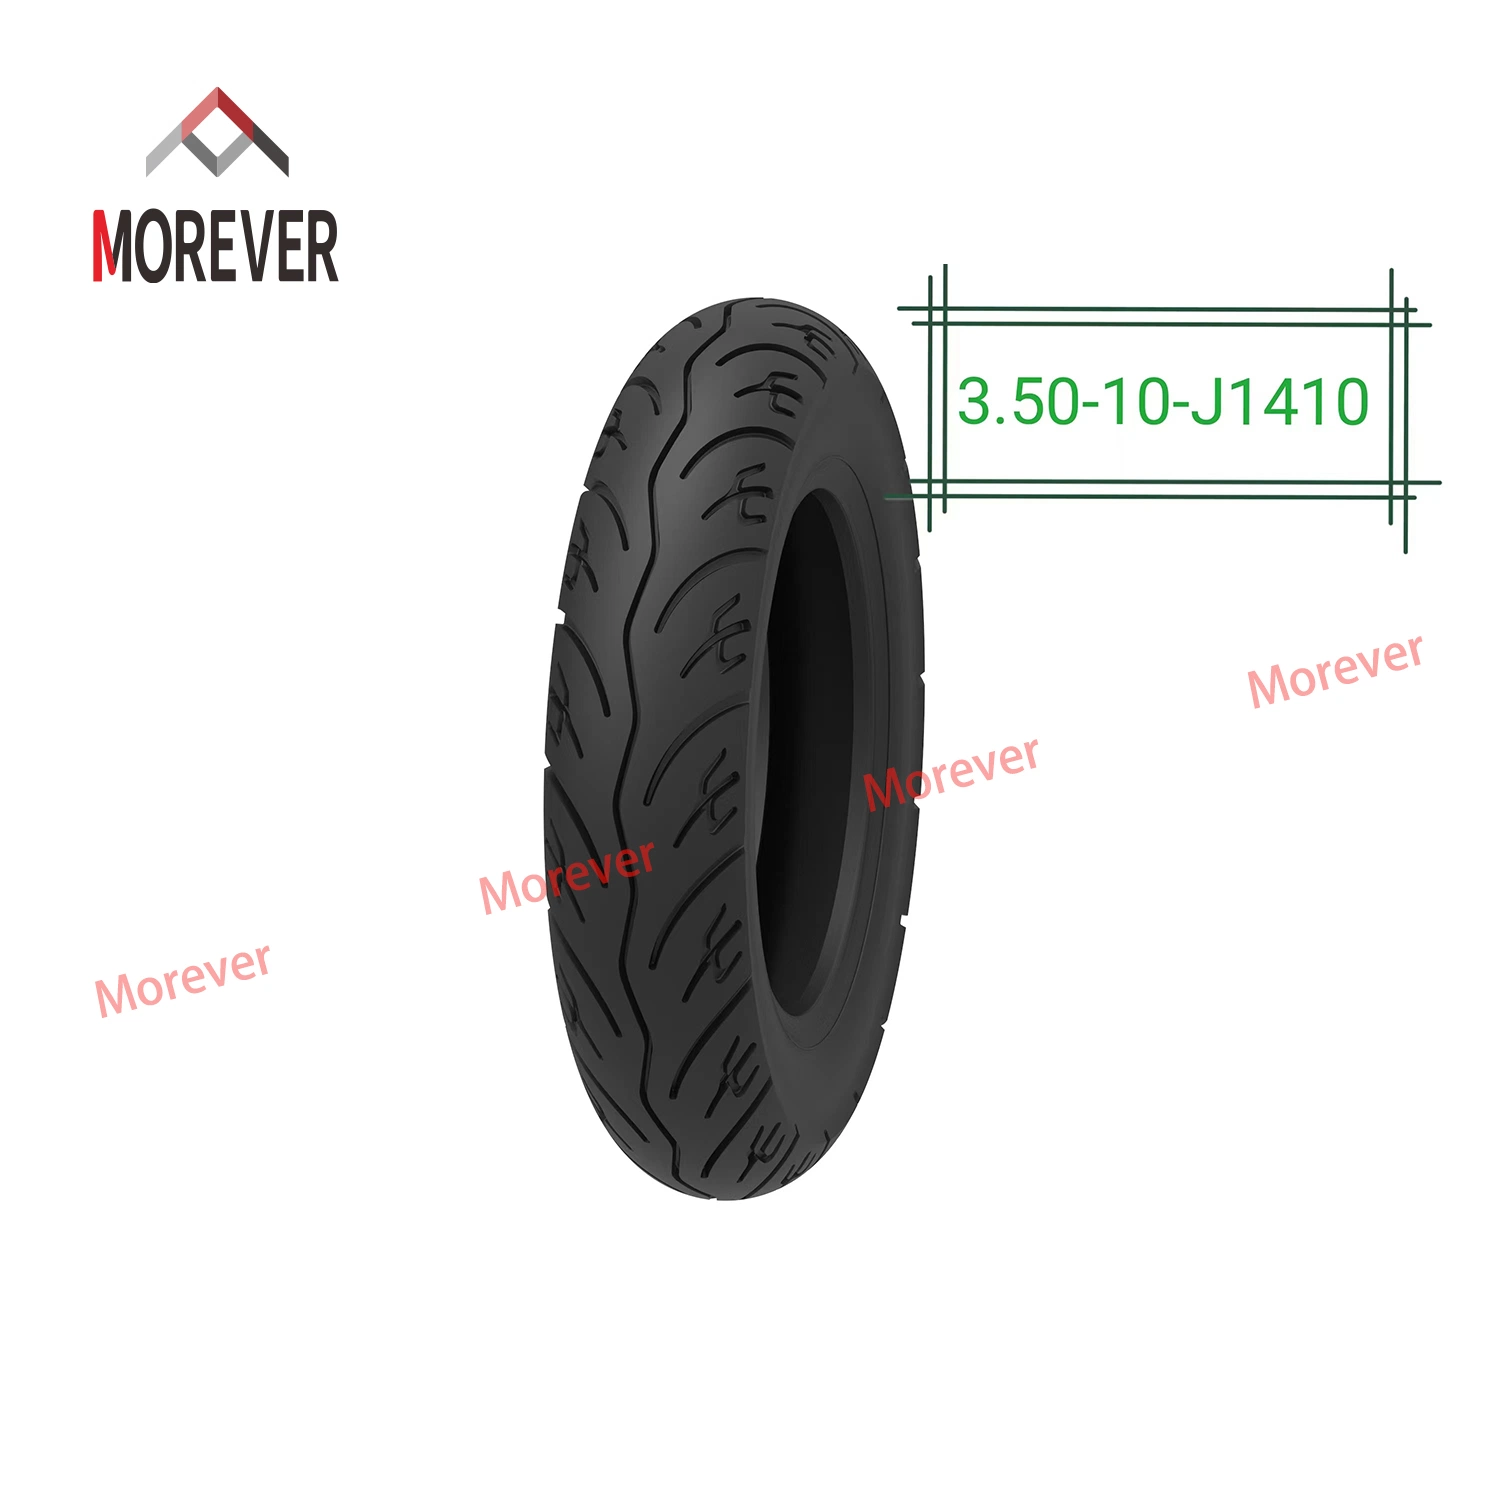 Motorcycle Spare Parts Tubeless Tire Motorcycle Tire Rubber Tires 3.50-10-J1410